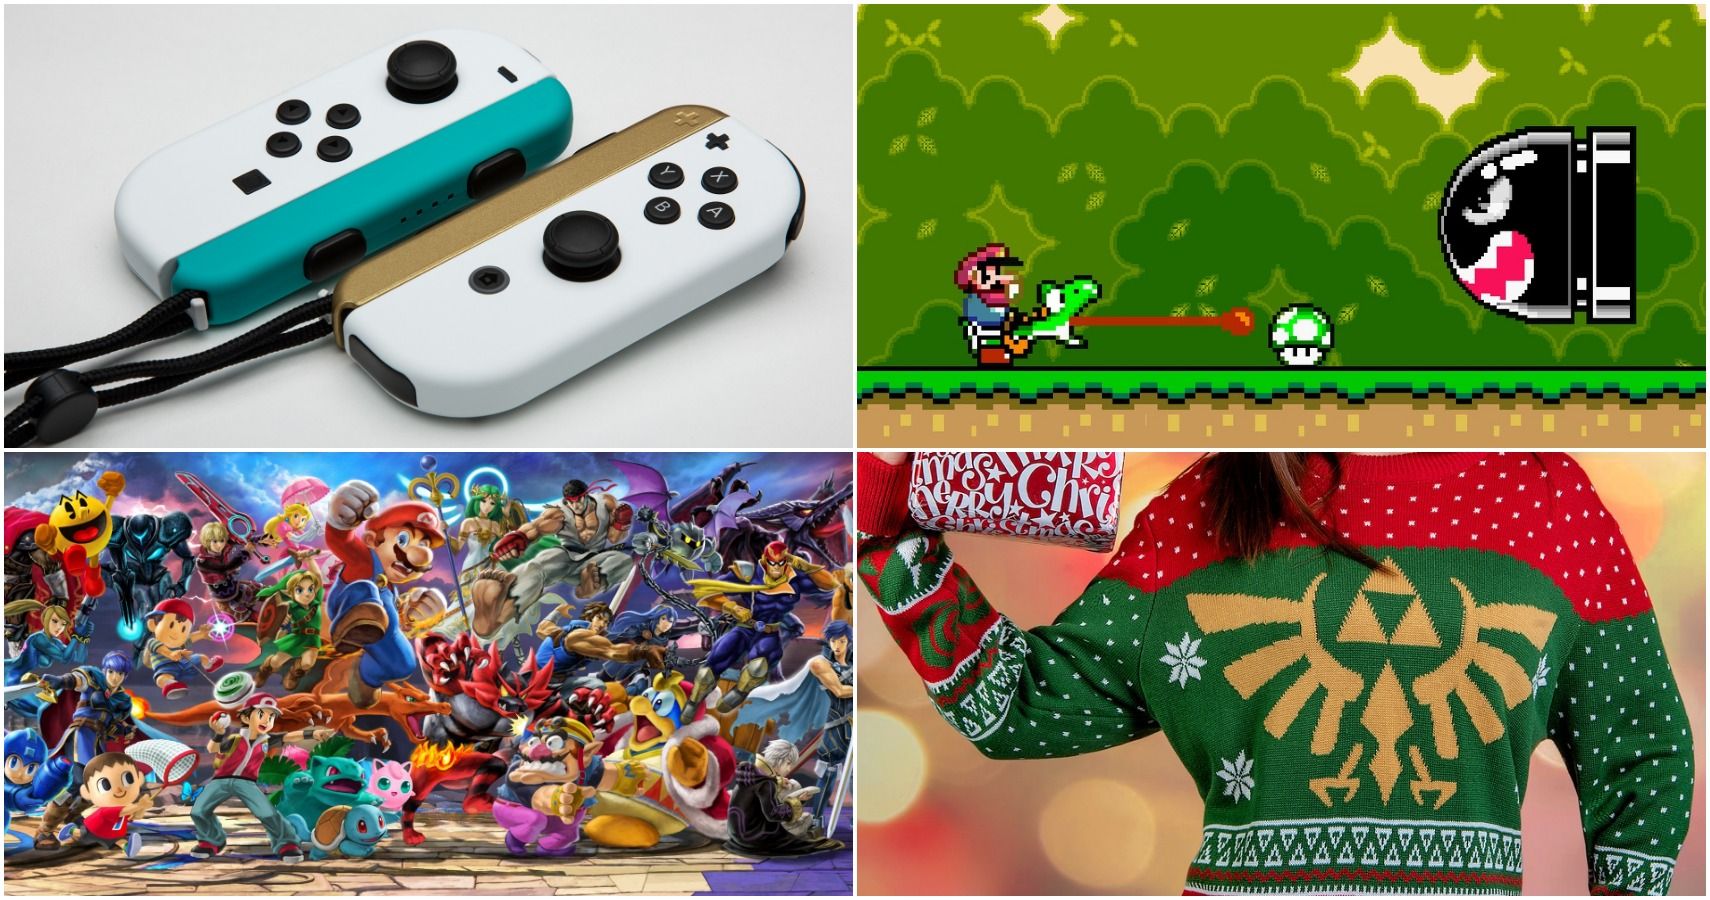 https://static1.thegamerimages.com/wordpress/wp-content/uploads/2019/12/Nintendo-Gifts-Feature-Image-Improved.jpg